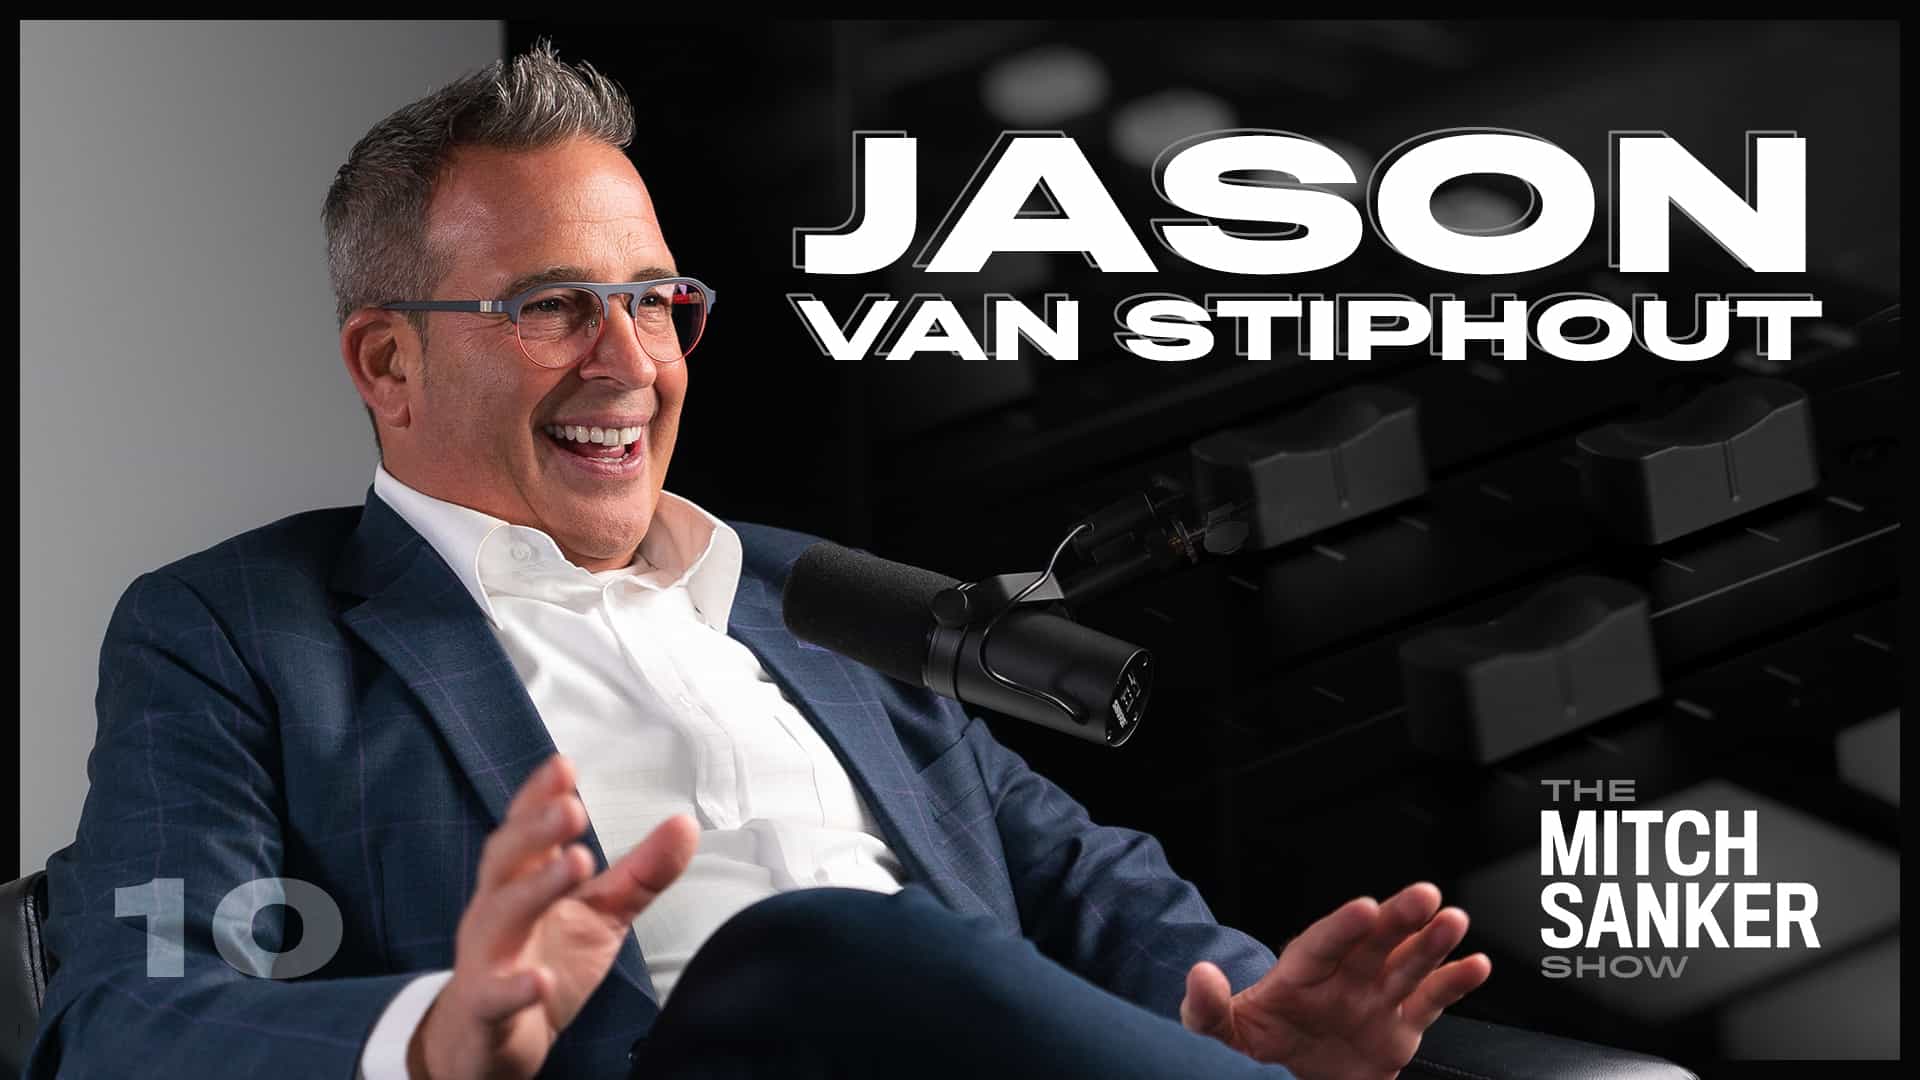 You are currently viewing The Mitch Sanker Show – Episode 10 featuring Jason van Stiphout